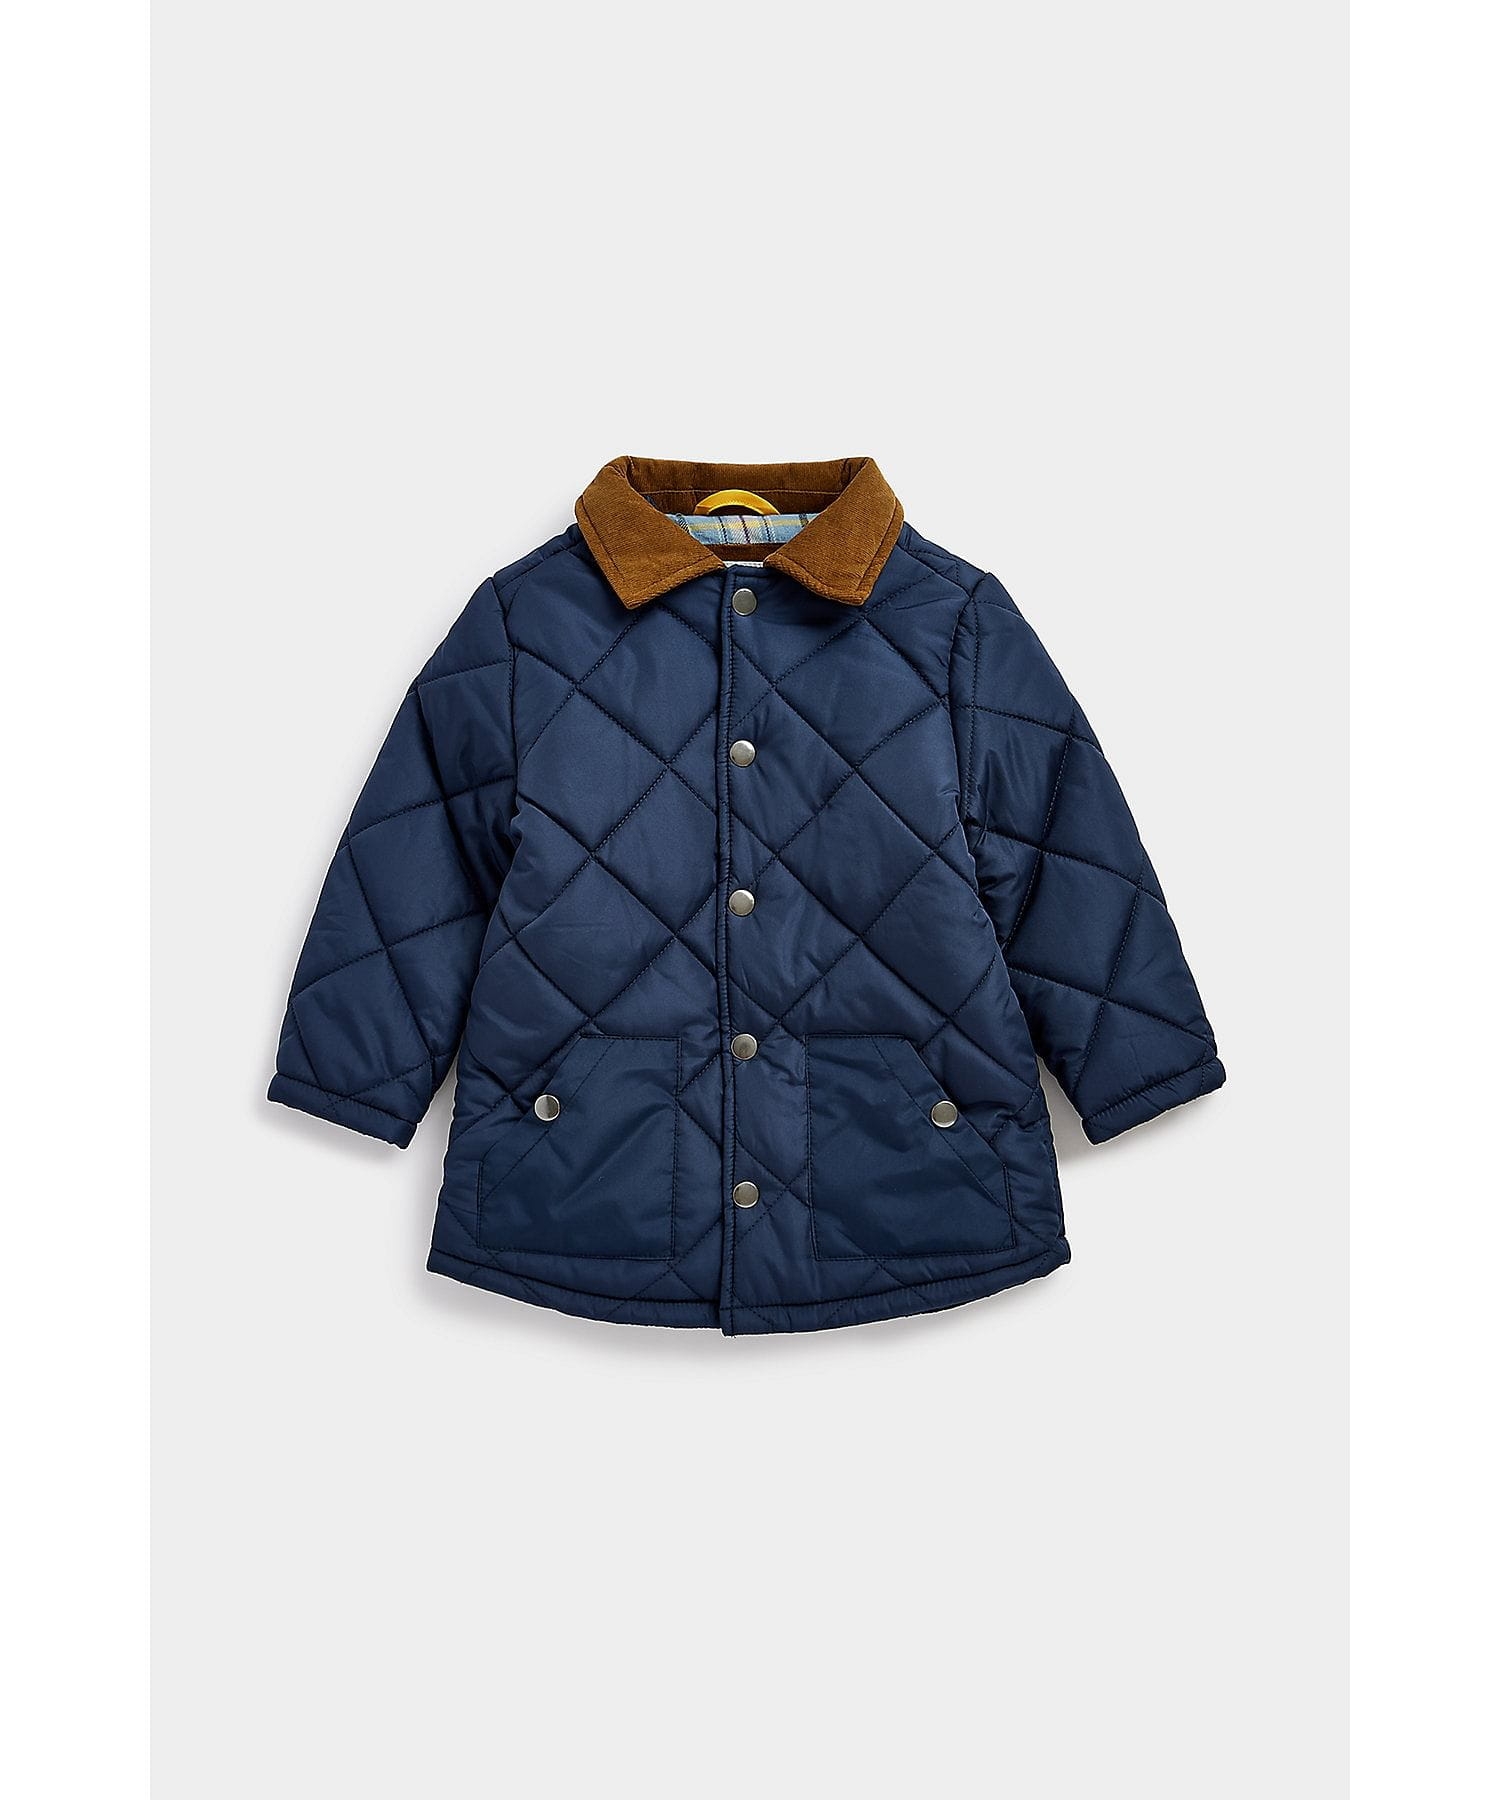 Mothercare | Boys Full Sleeves Jacket Contrast Collar-Navy 0